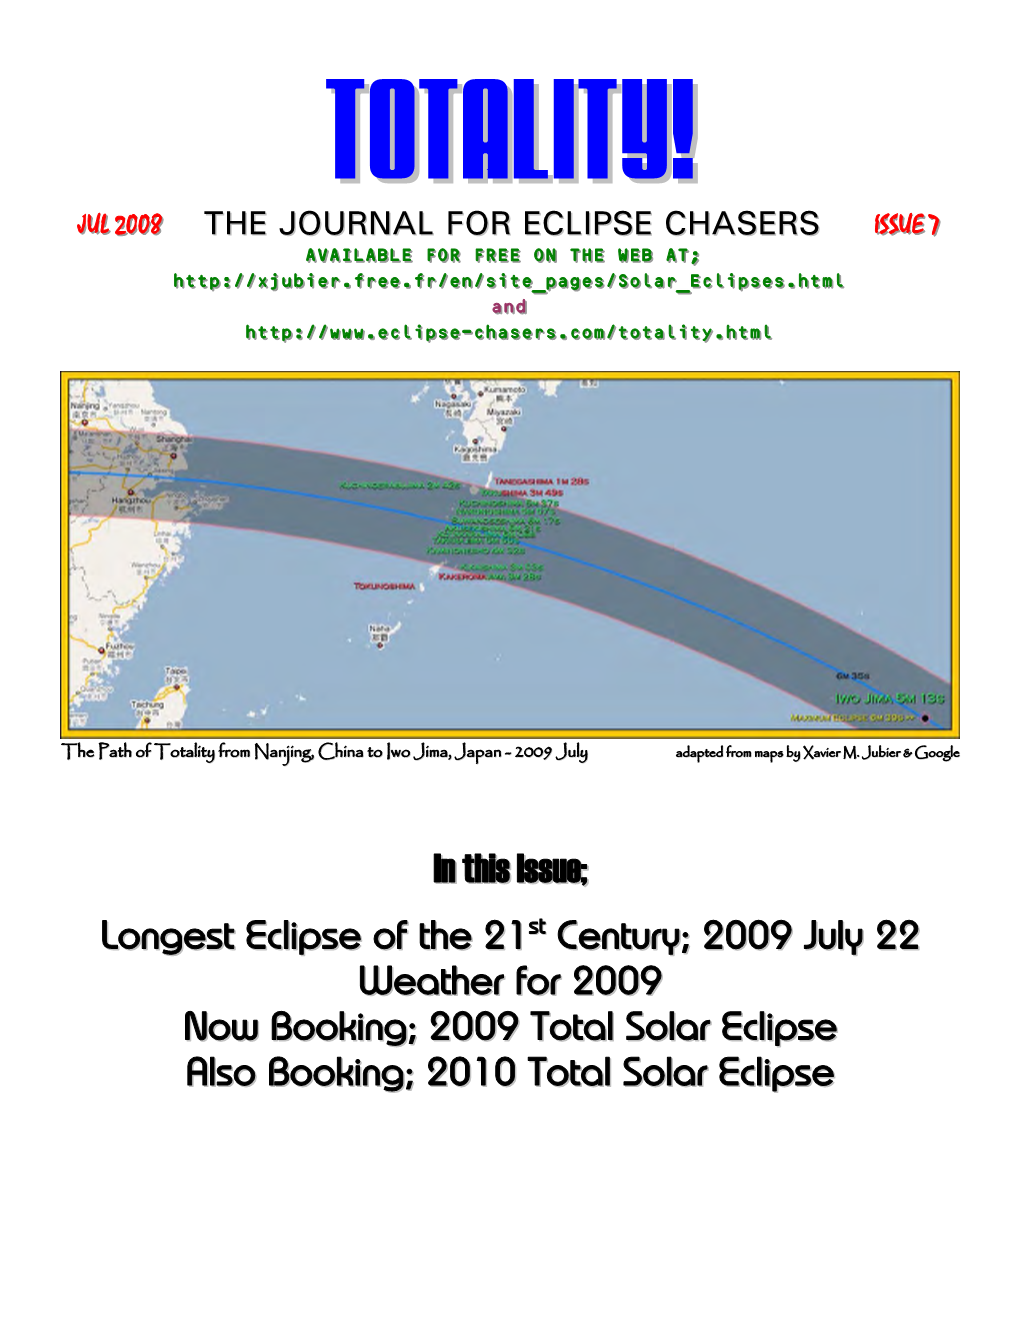 TOTALITY!, We Have Done a GOOGLE Web Search to Find Travel Agents That Are Presently Booking Eclipse Tours